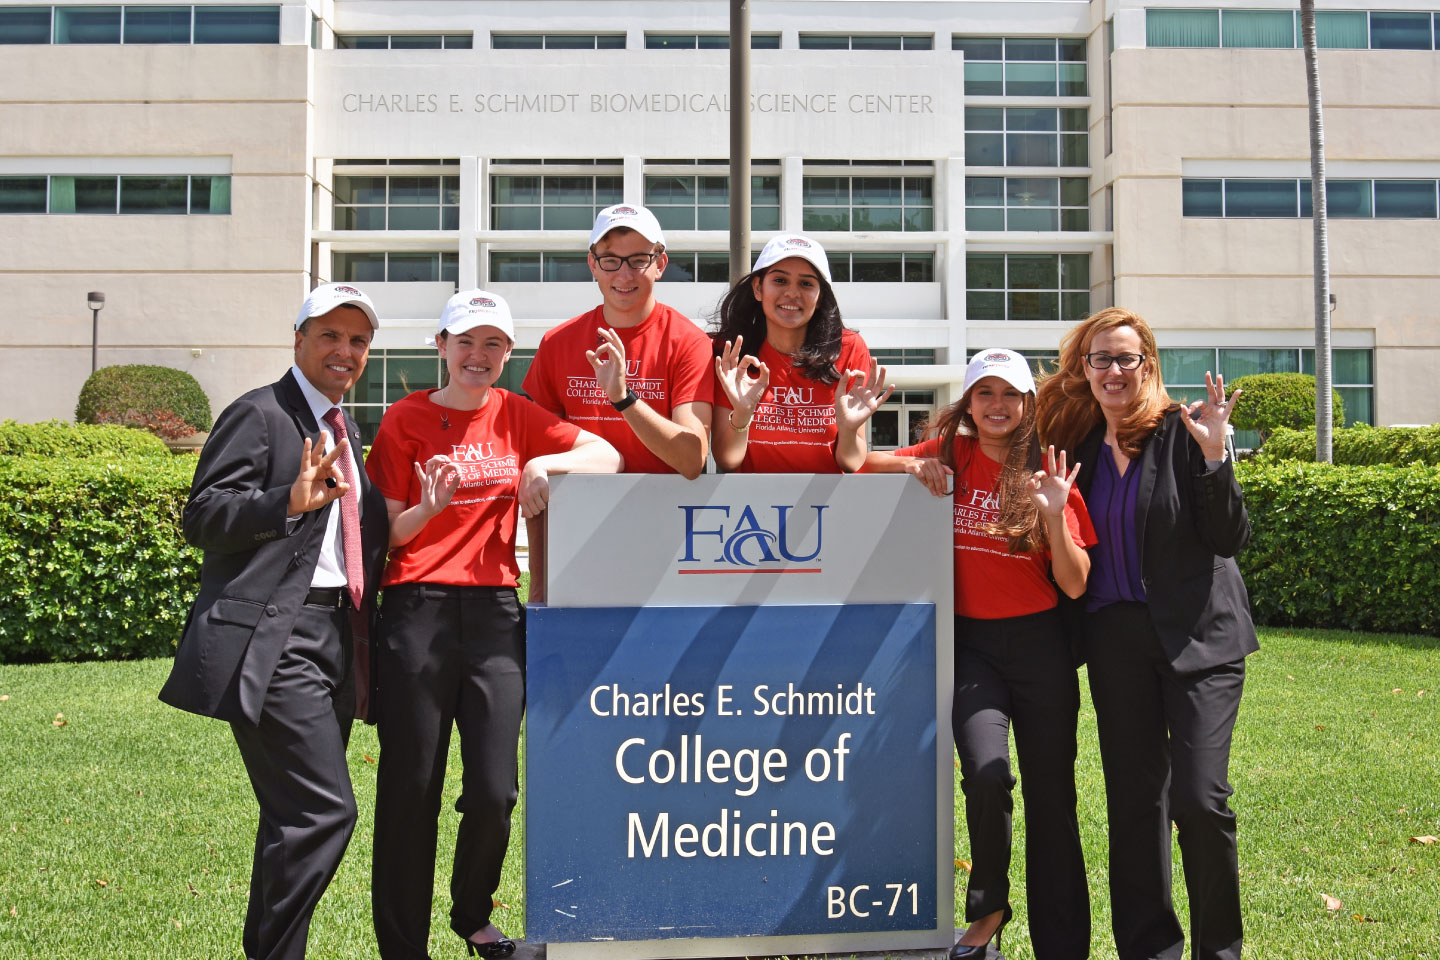 The first-of-its-kind pipeline program to be launched in the United States, M.D. Direct places high school students from FAU High School directly in-line for medical school at FAU, jumpstarting their careers as young, aspiring physicians-to-be.